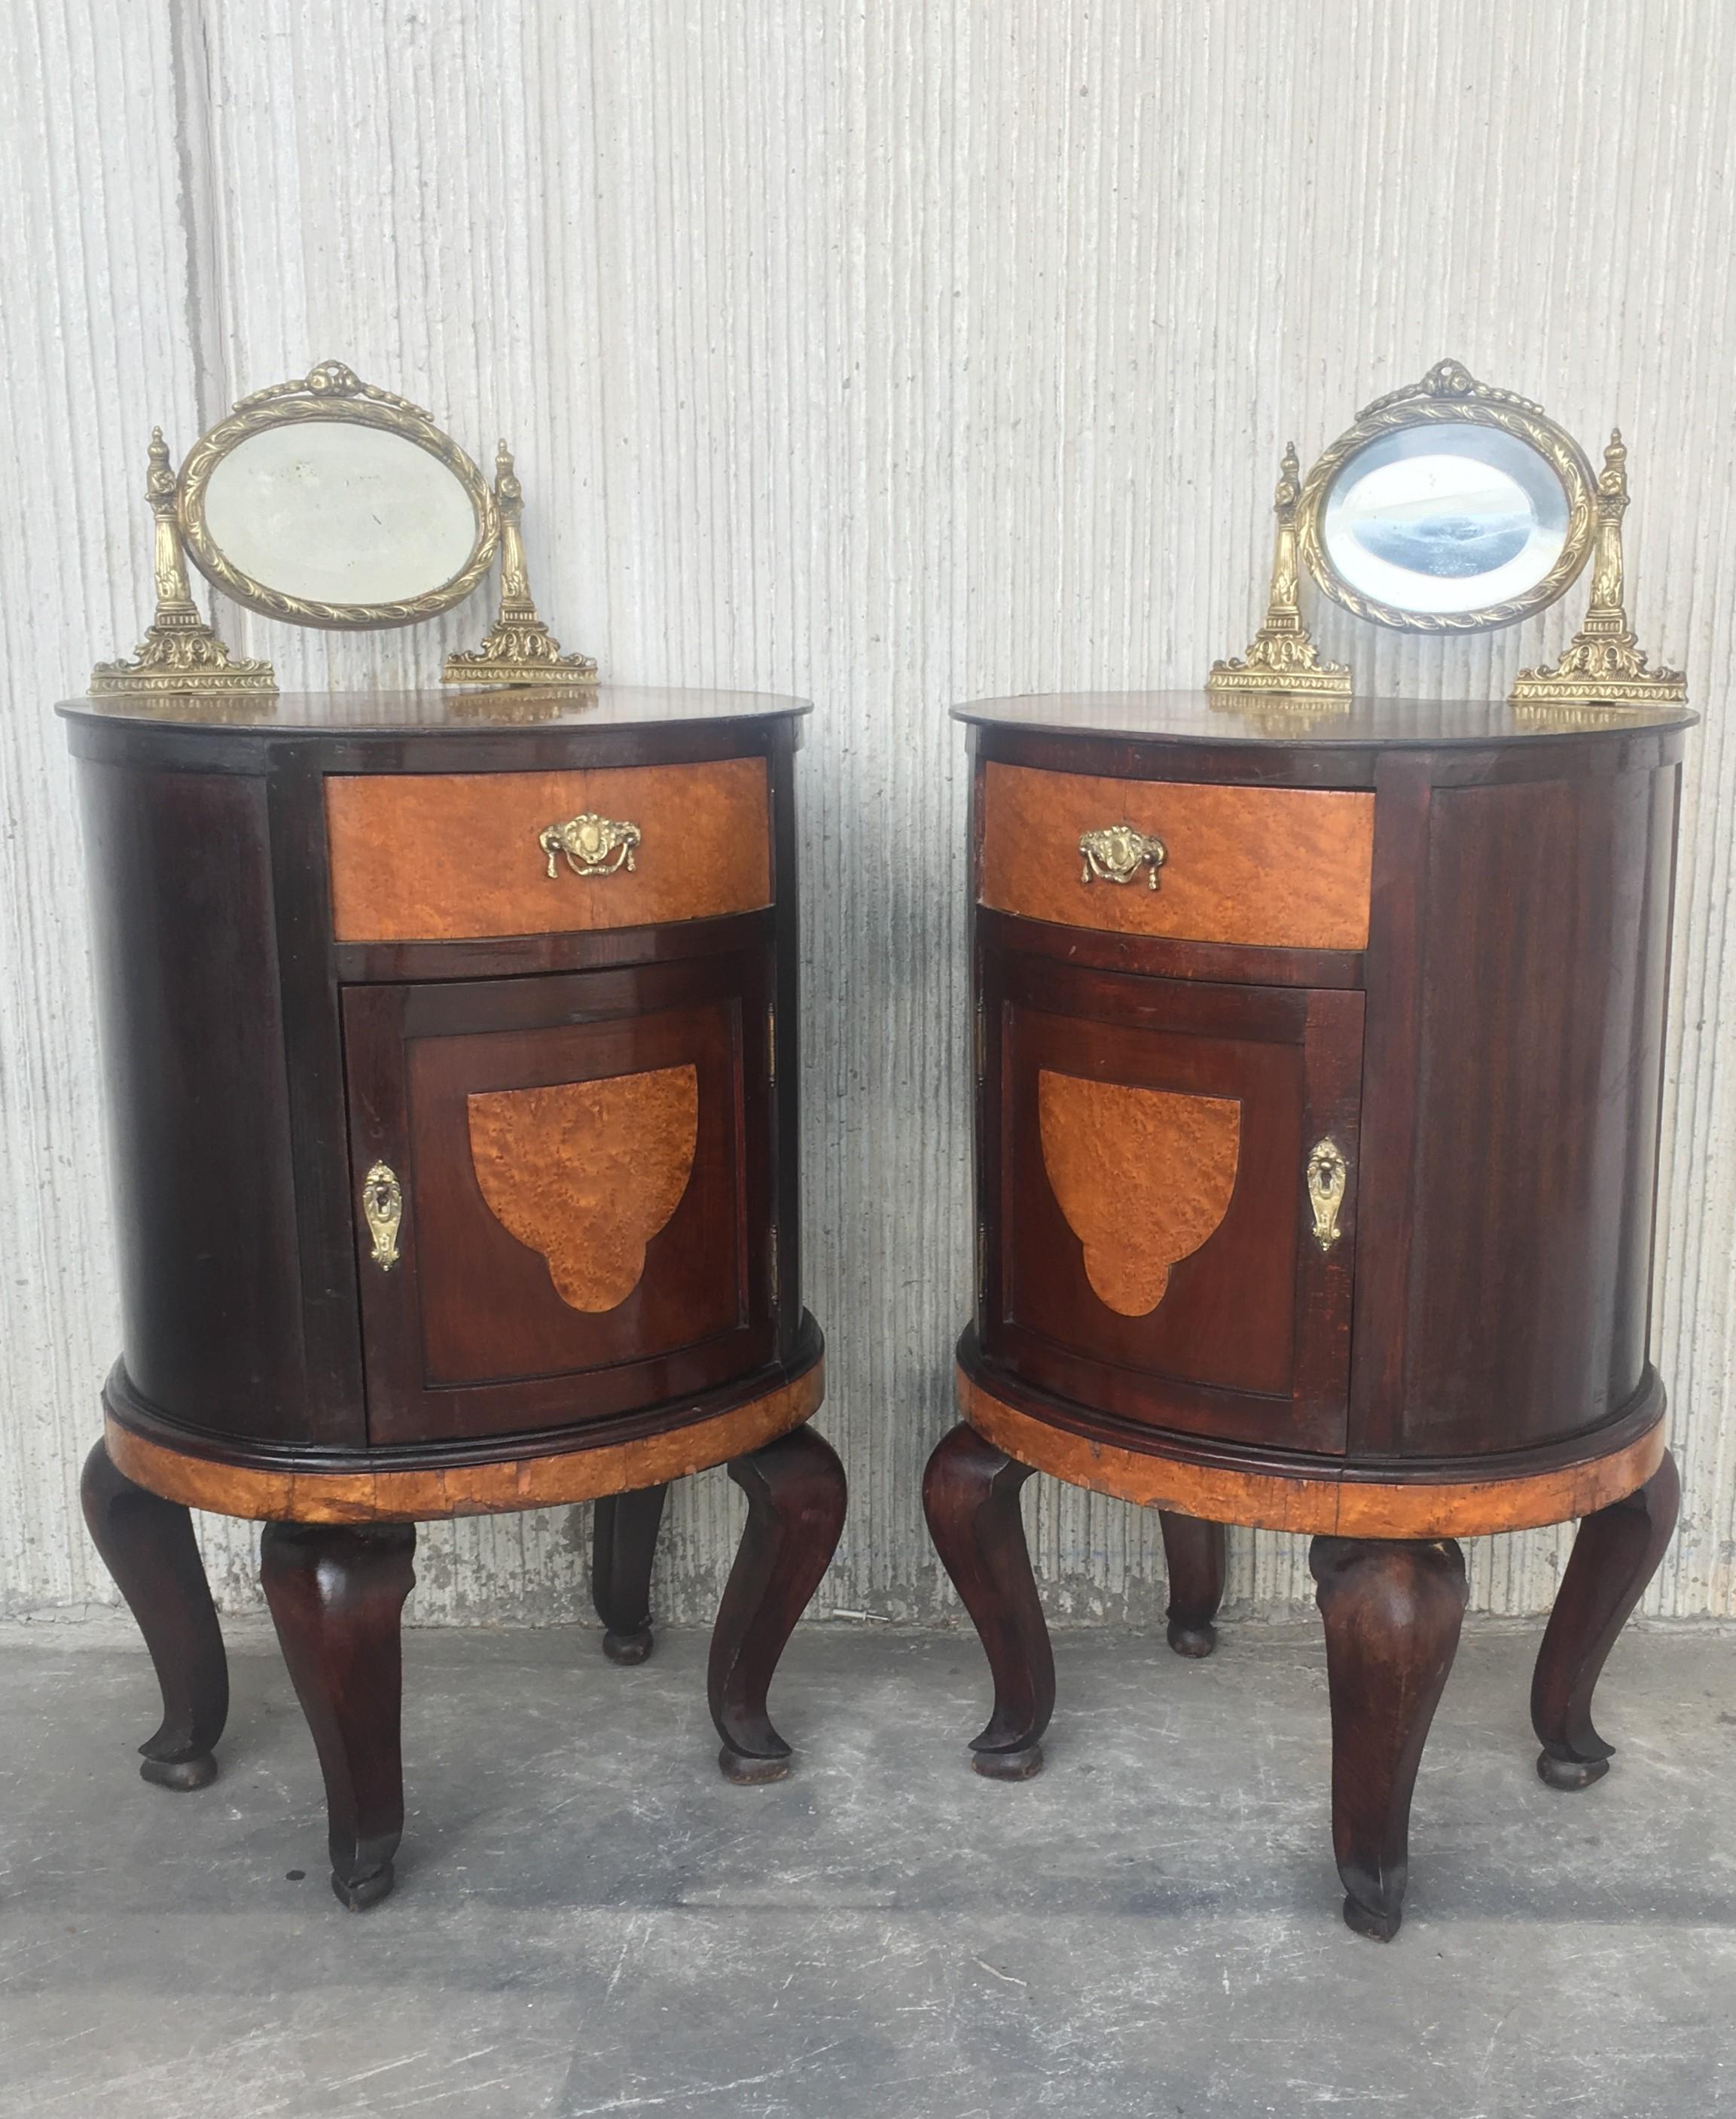 Art Deco Style Marquetry Nightstands with Metal and Mirror Crest, Pair (19. Jahrhundert)